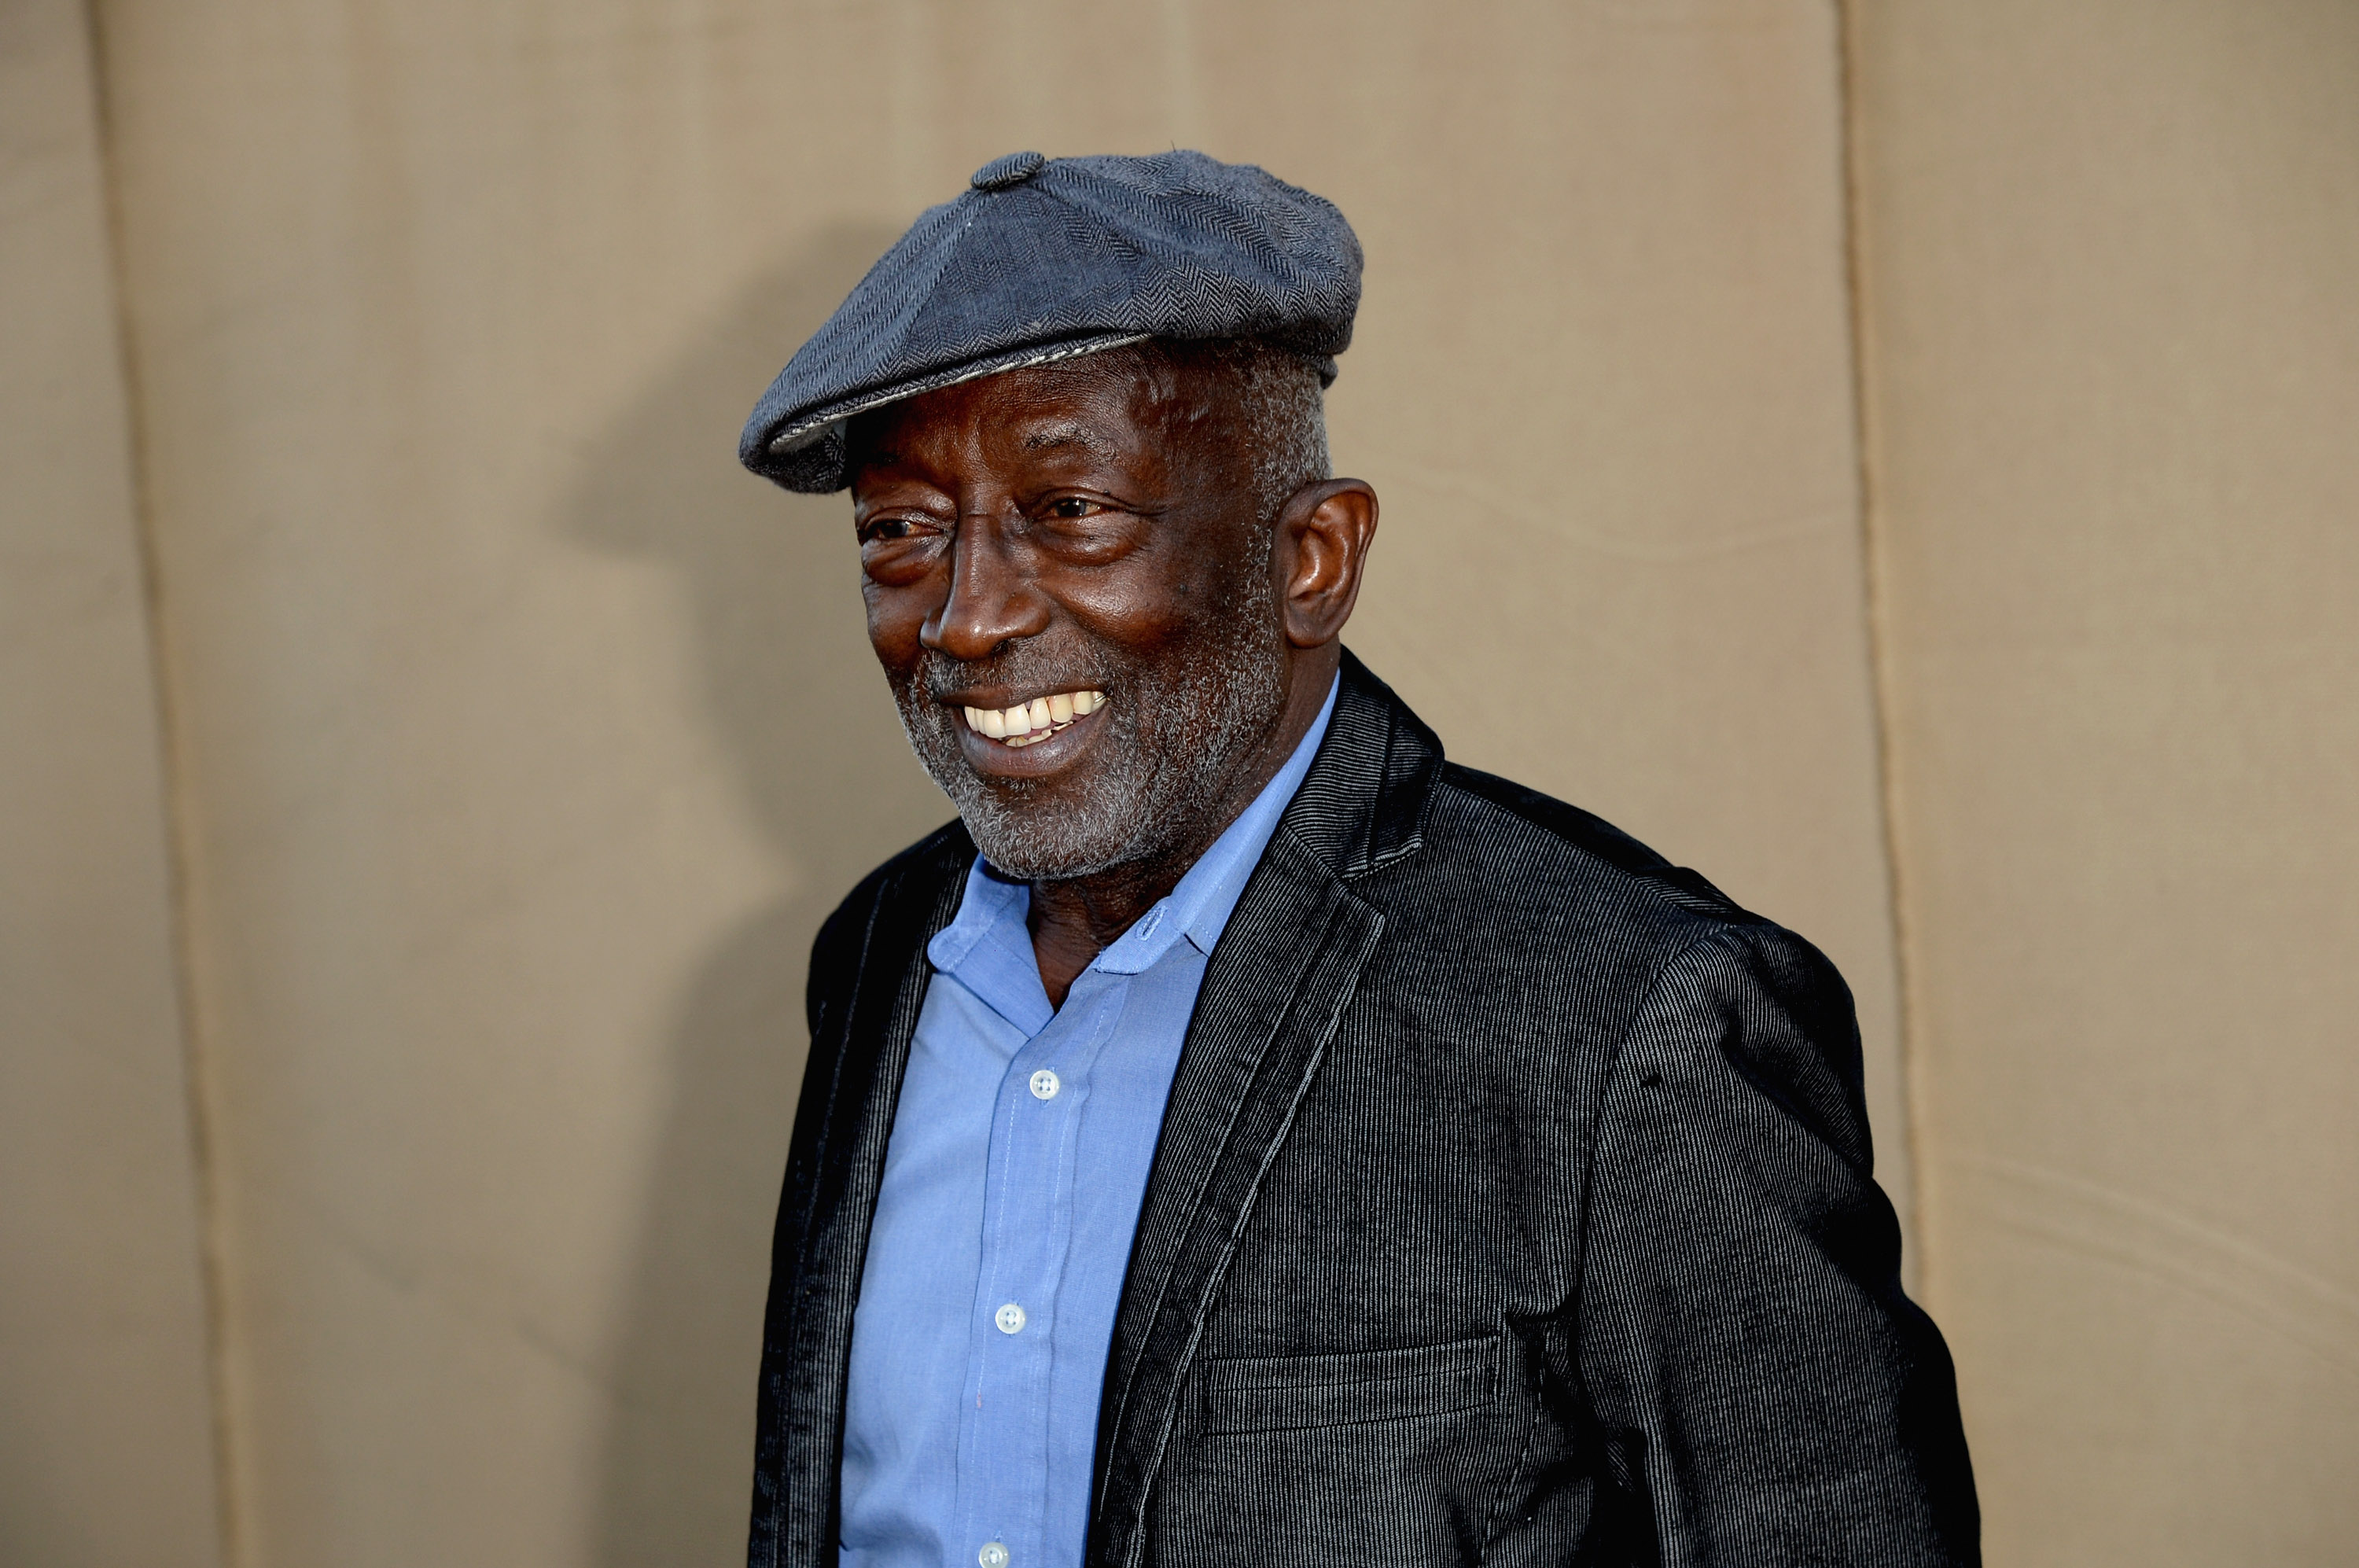 Garrett Morris to celebrate 87th birthday with star on the Hollywood Walk of Fame